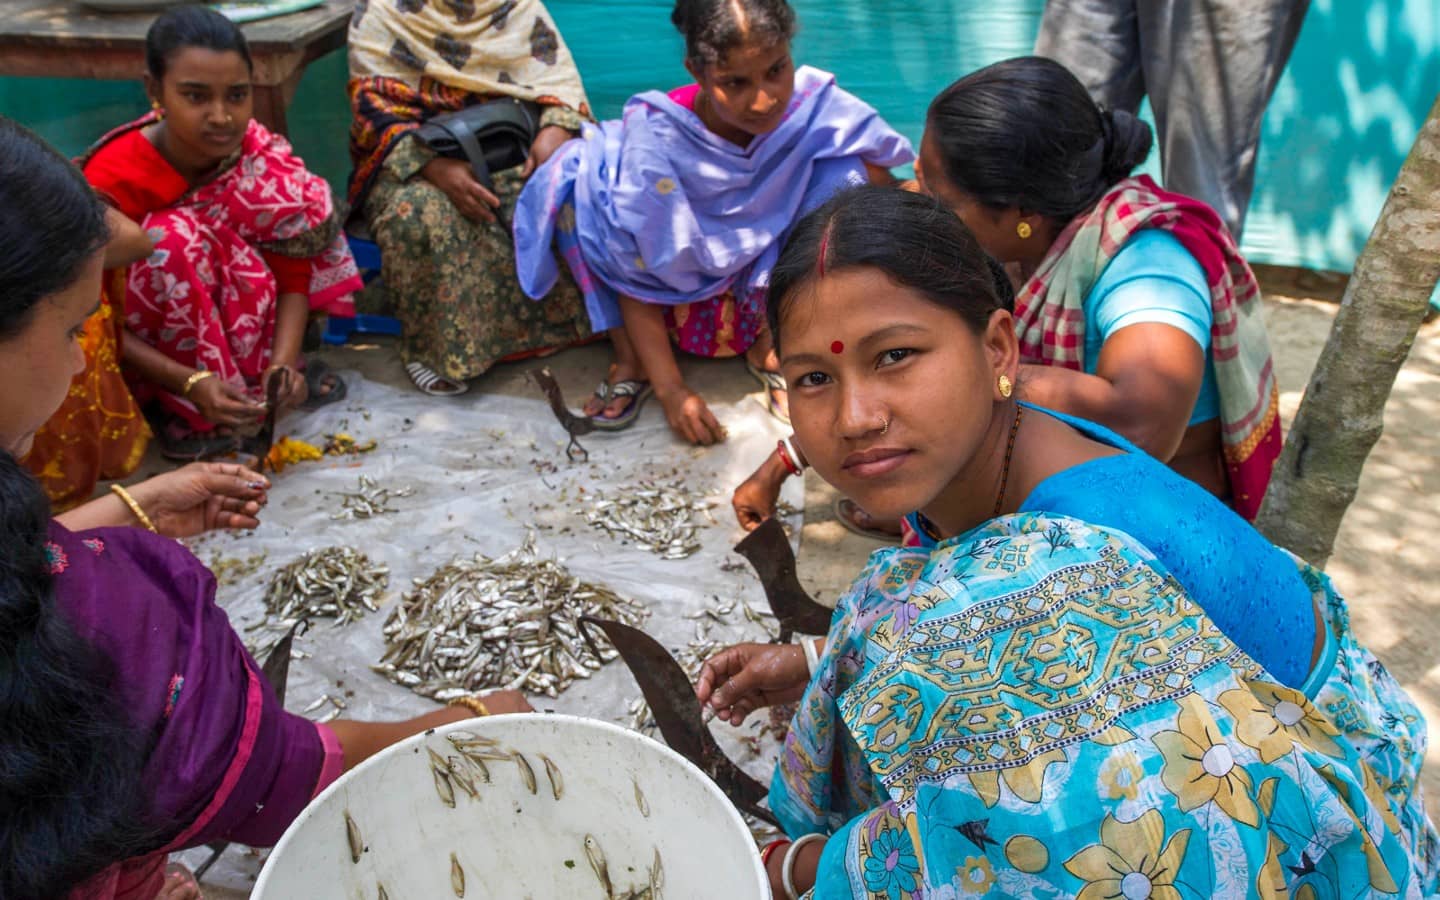 Bangladesh/Indian Presenting Women. They Are Sitting/bent On The Floor In A Circle And Sorting Raw Fish In A Bowl.